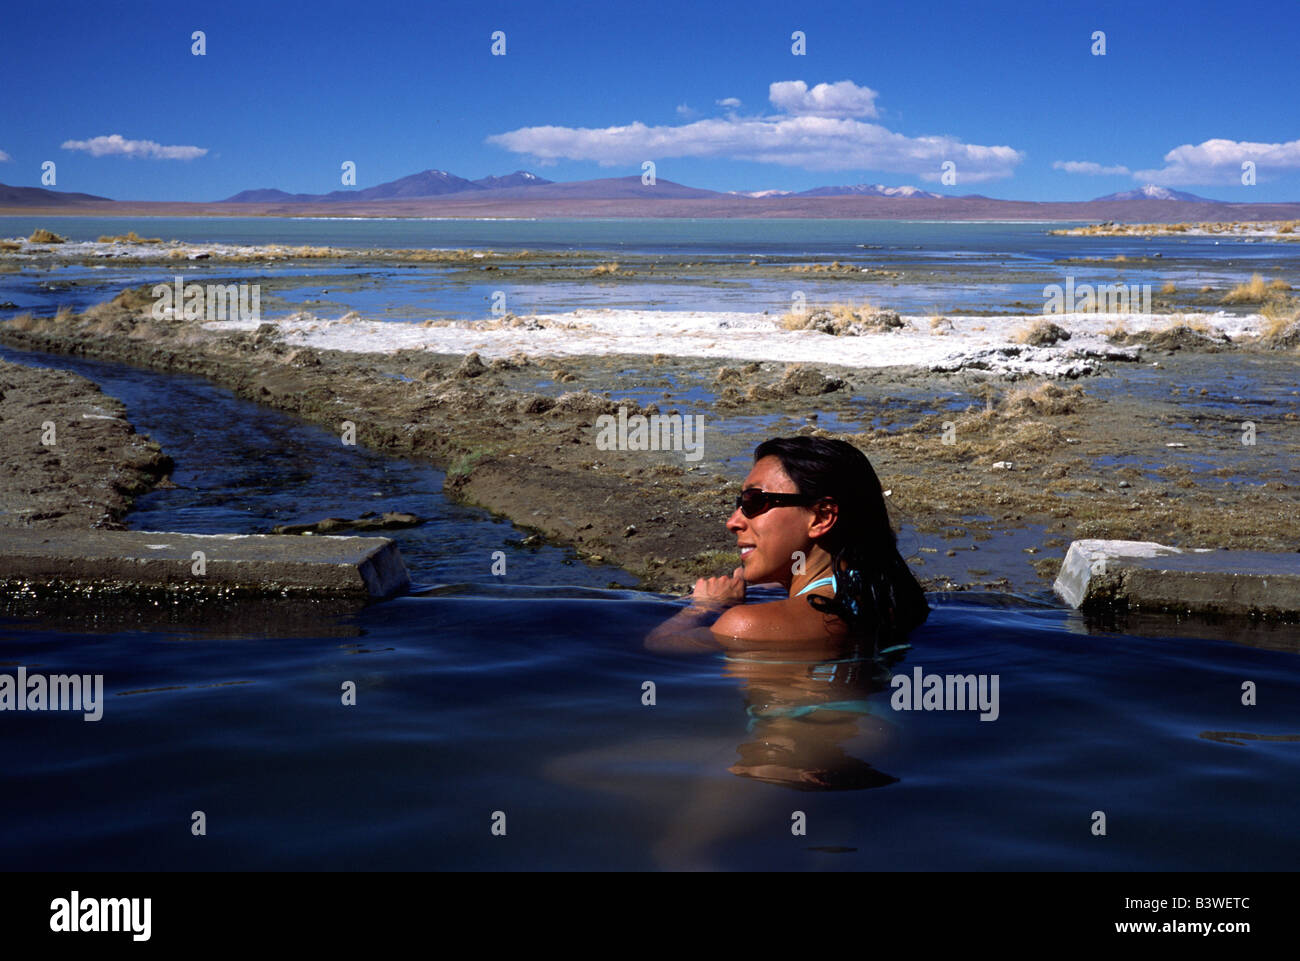 Bolivia, Aguas Calientes, Woman in bikini relaxing in the hot springs at Aguas Calientes on Southwest Circuit Tour. (MR) Stock Photo